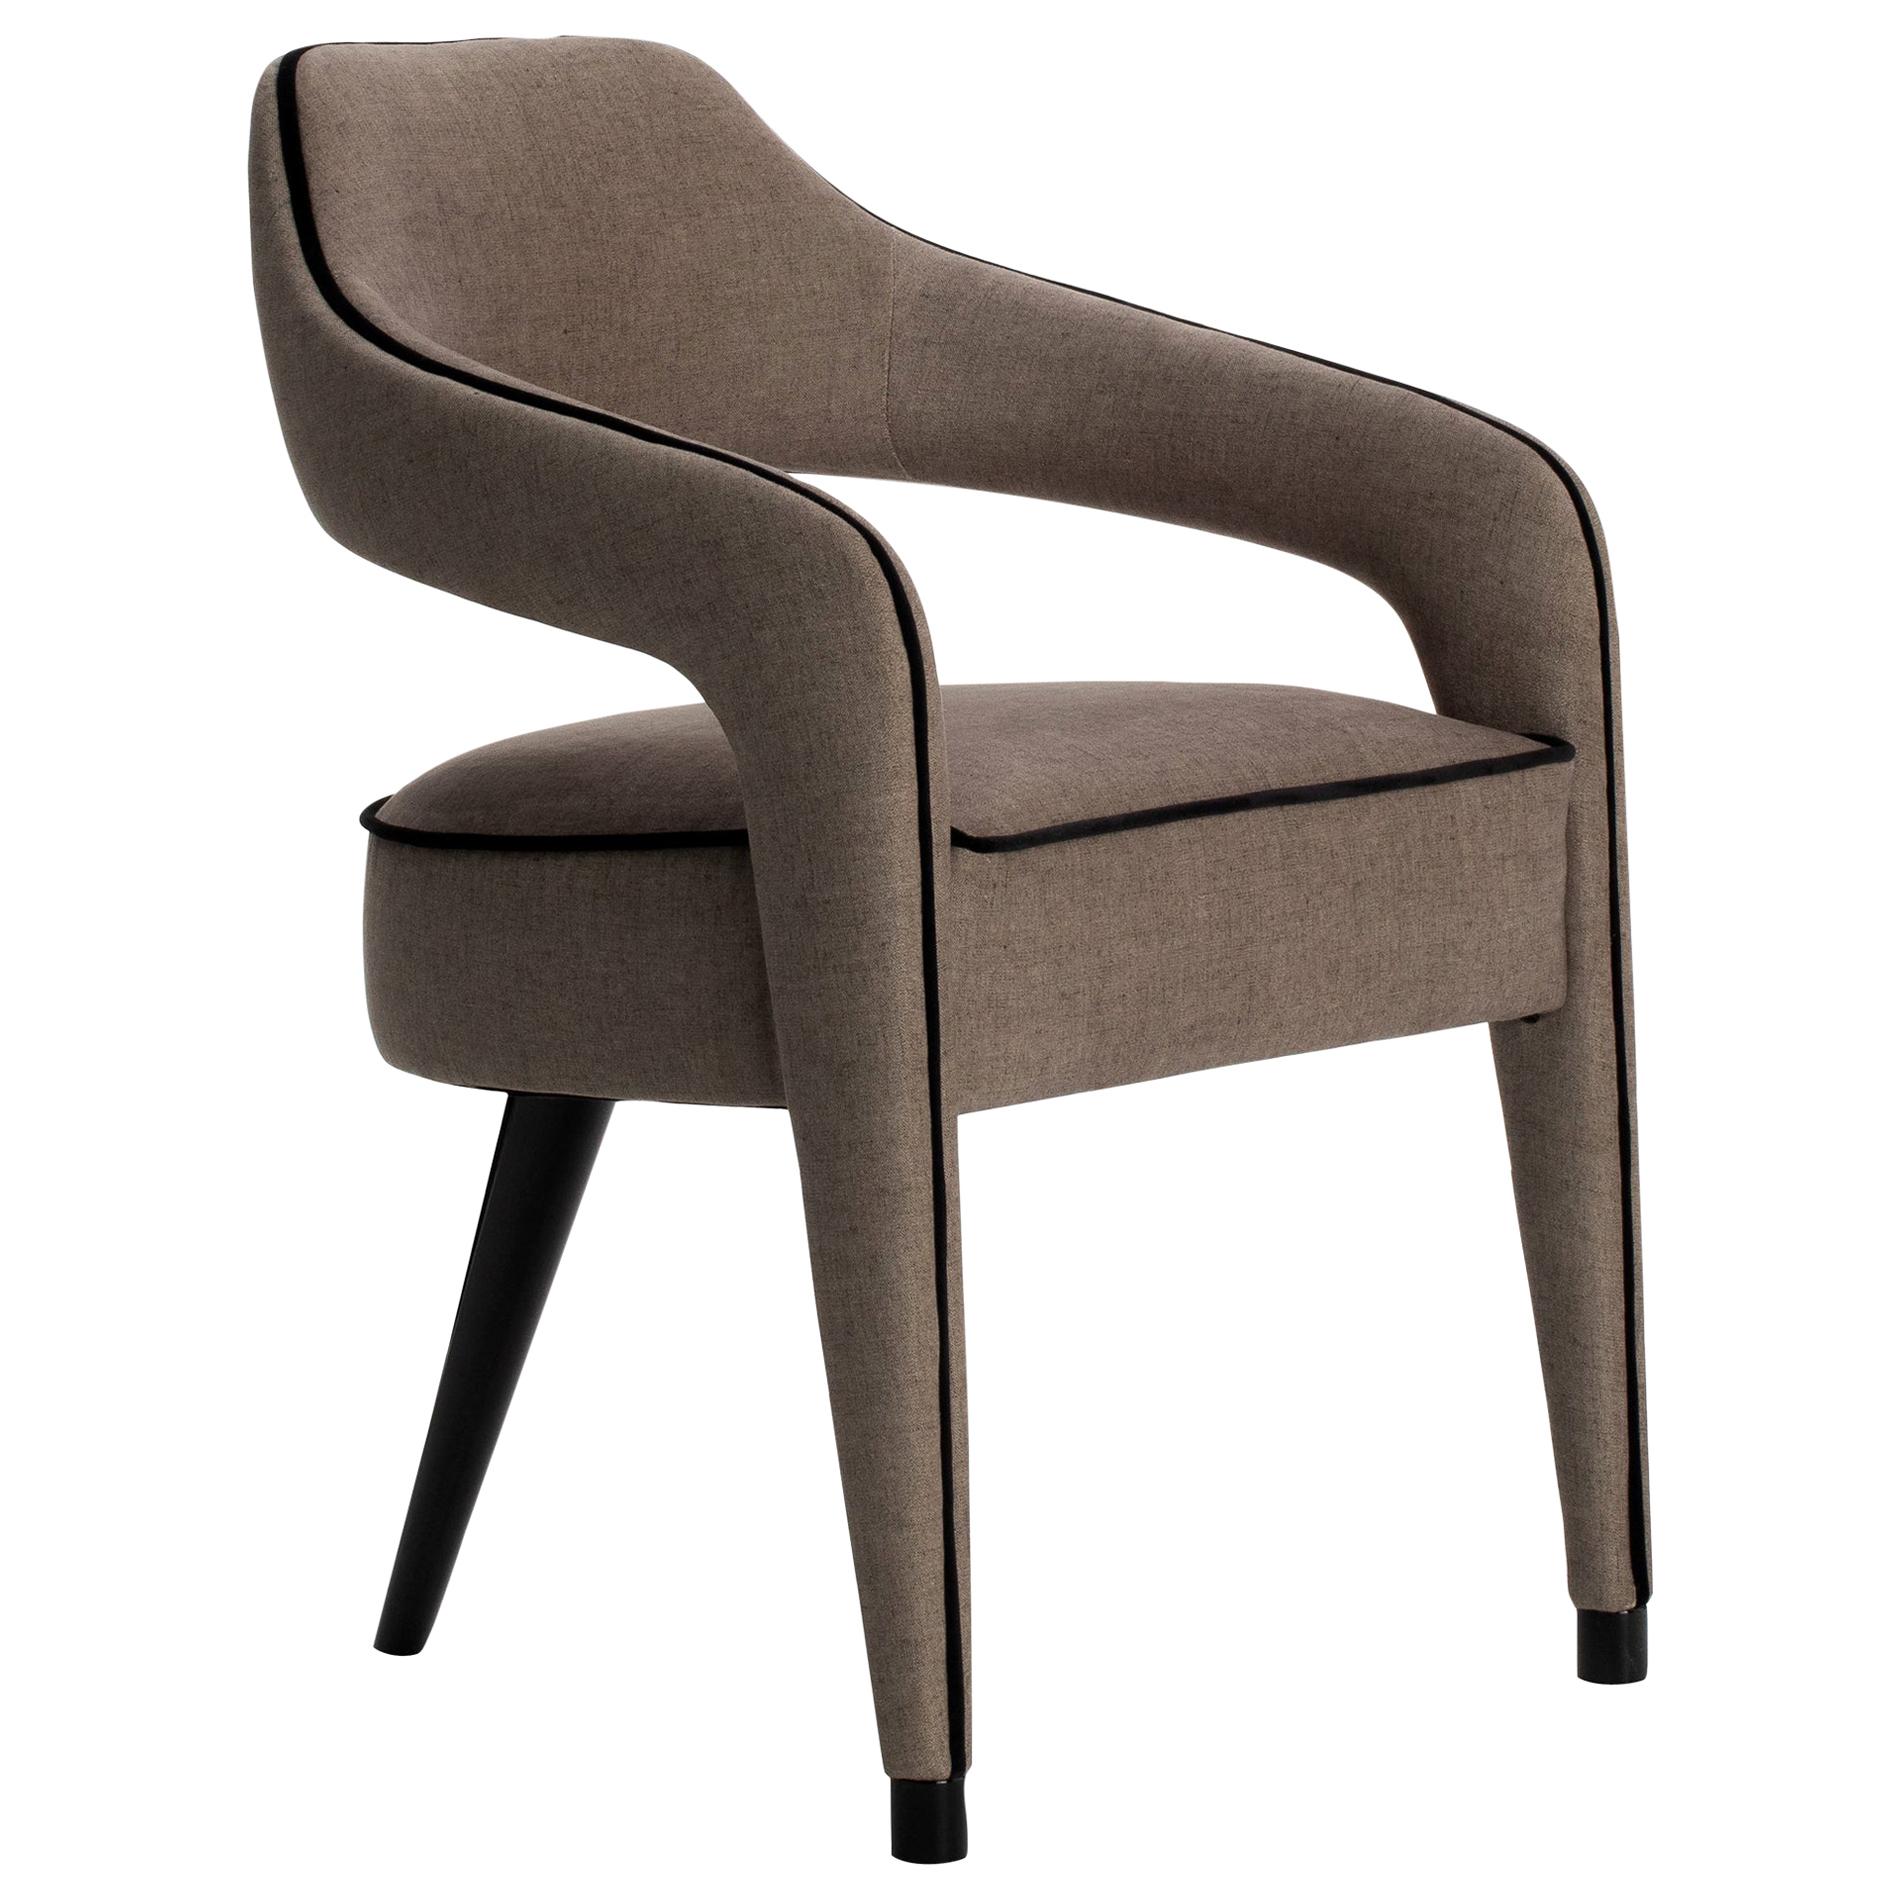 Invicta Dining Chair with One Back Foot in Solid Wood and Piping Details